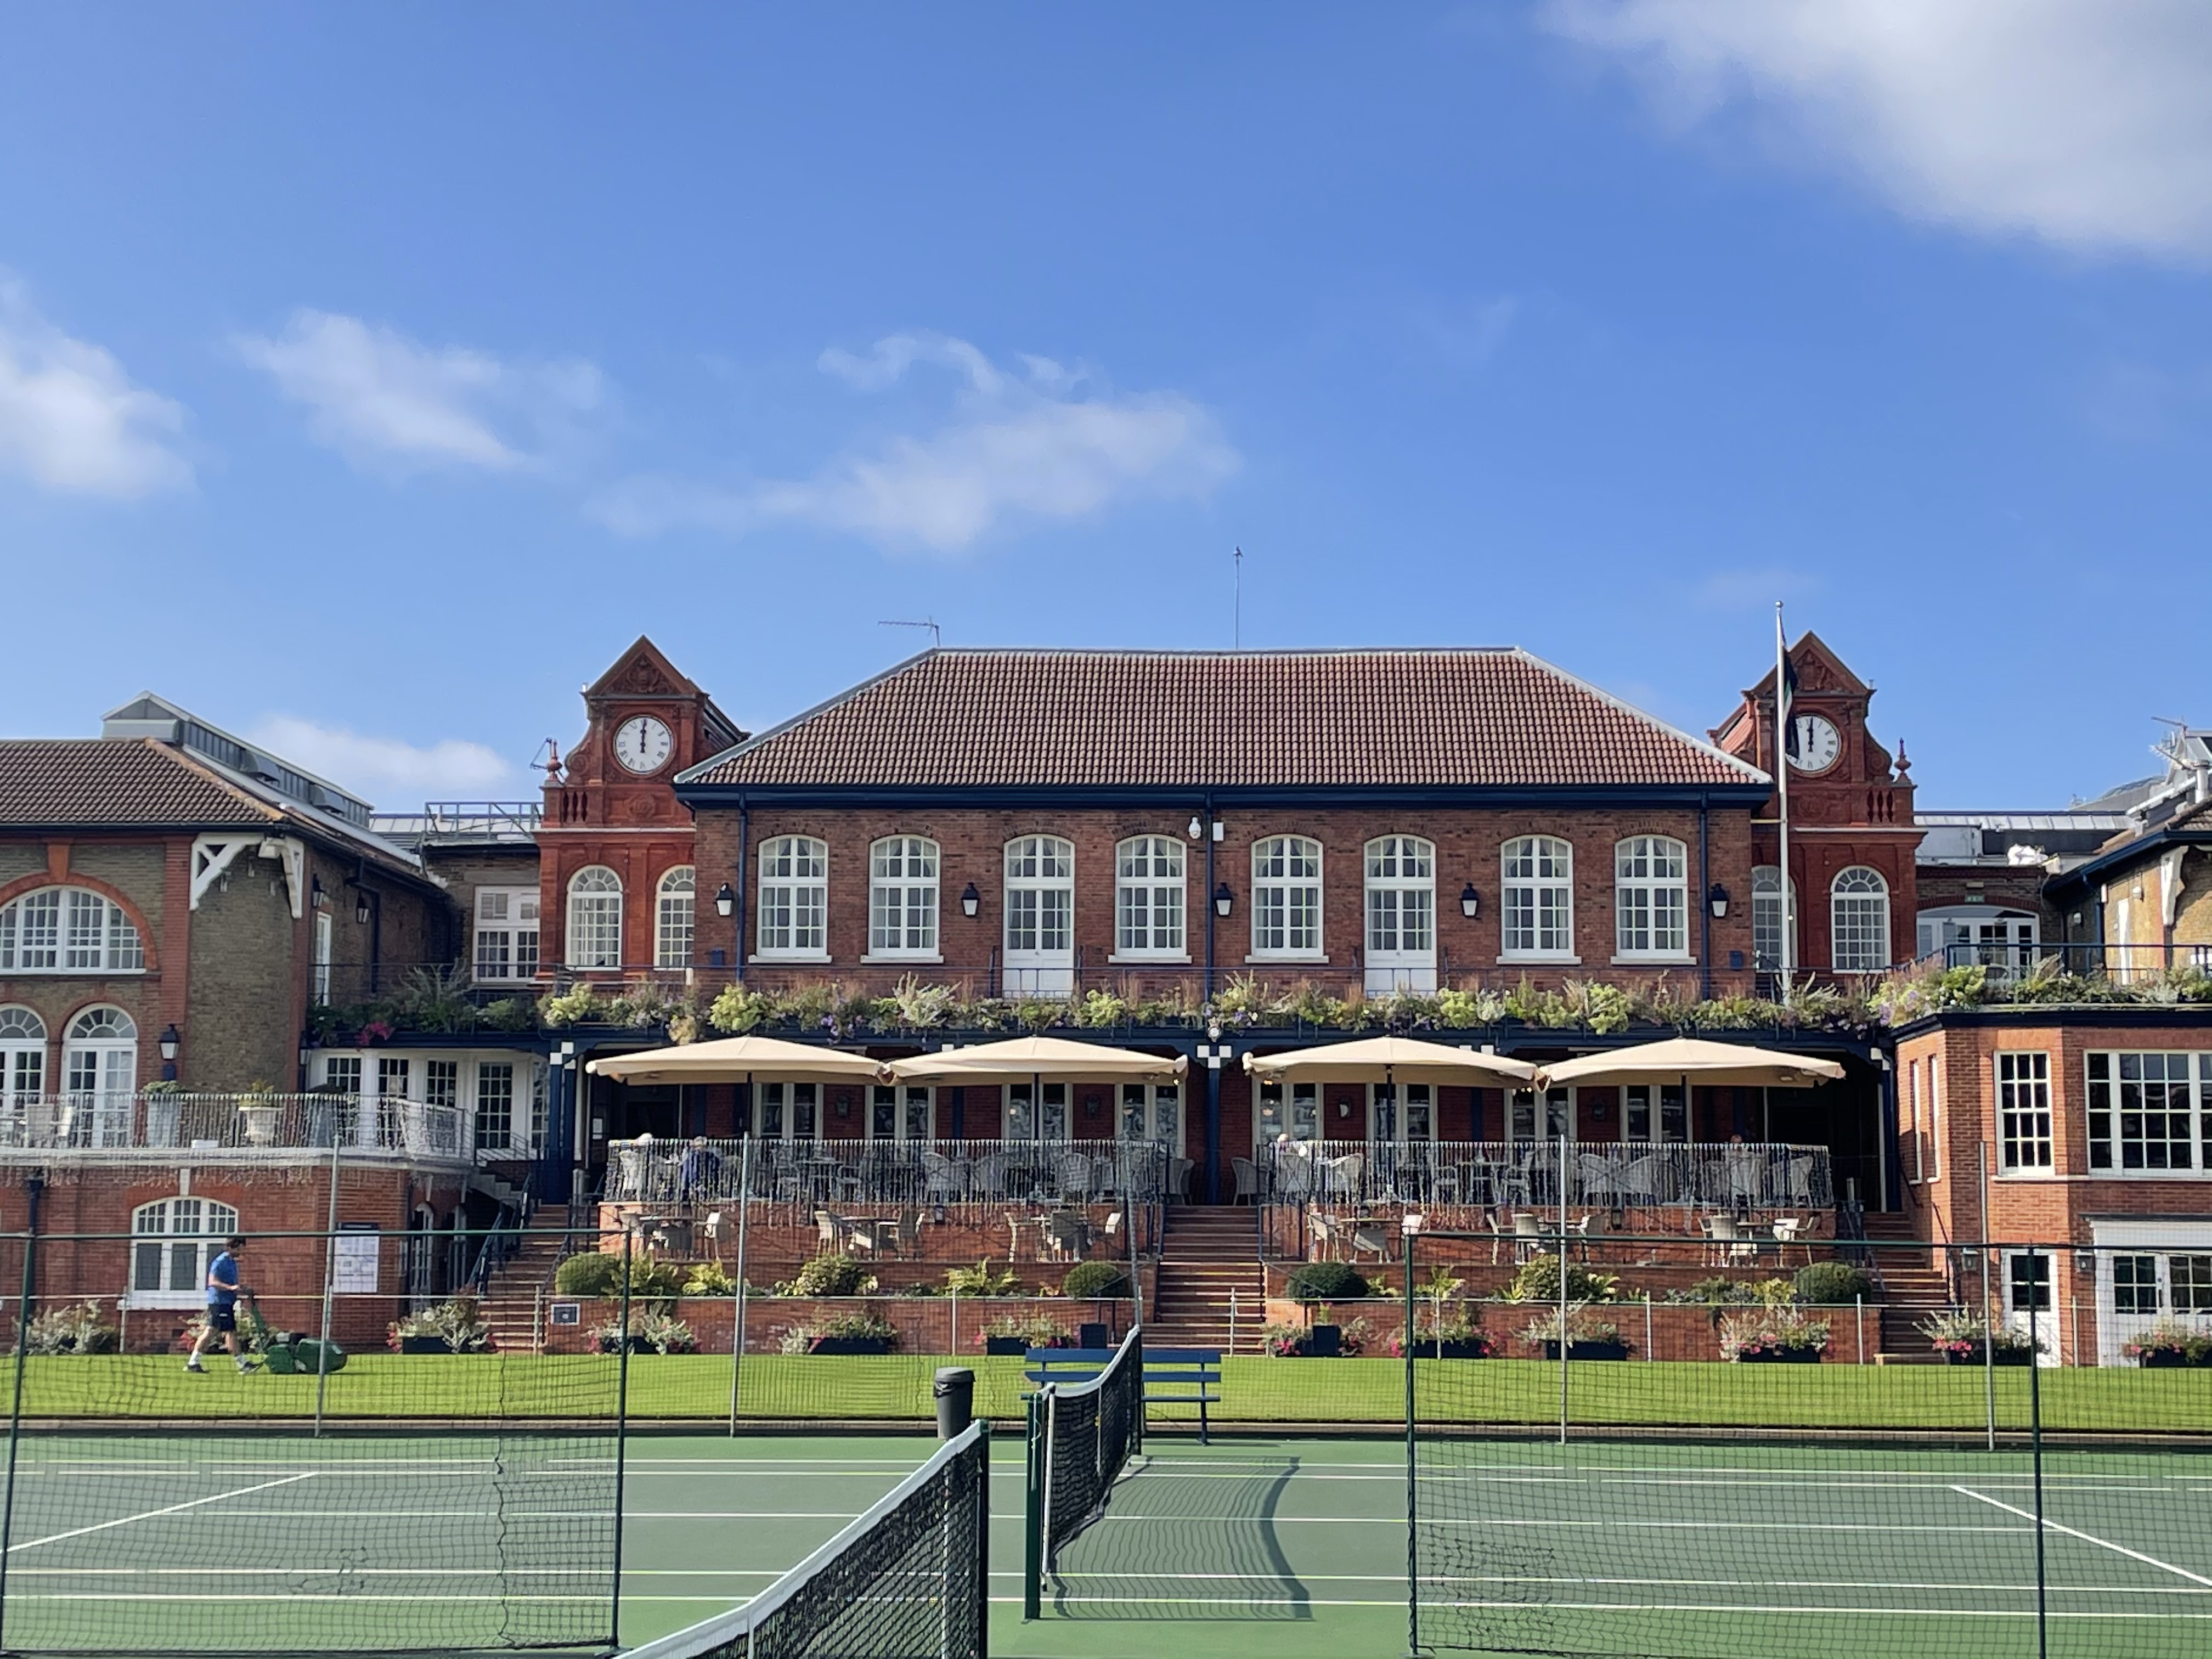 The Queen's Club, London